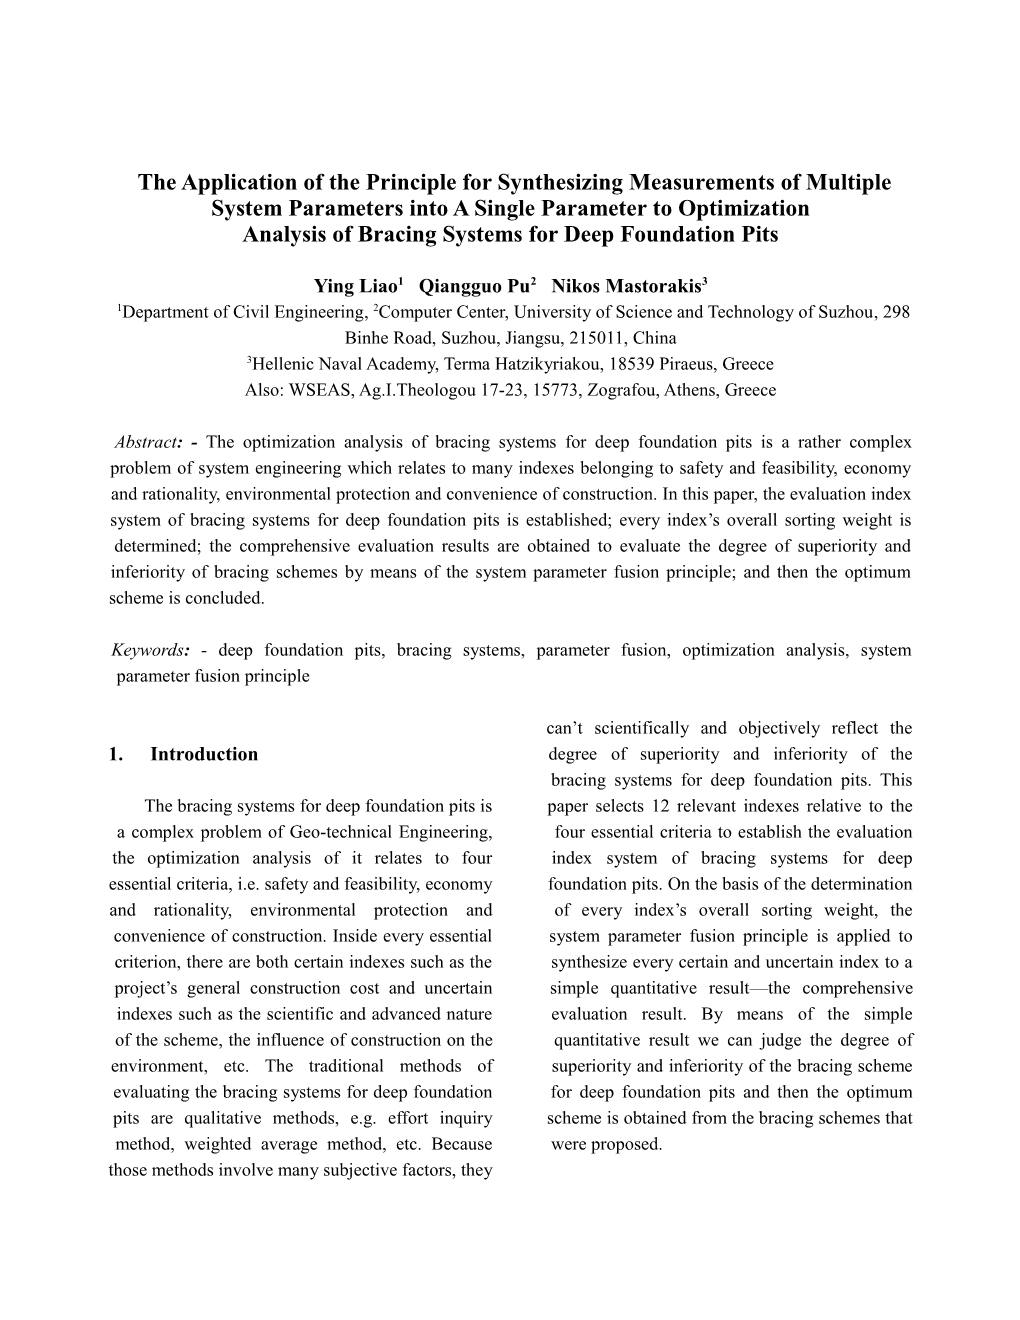 The Application of System Parameter Fusion Principle to Optimization Analysis of Bracing